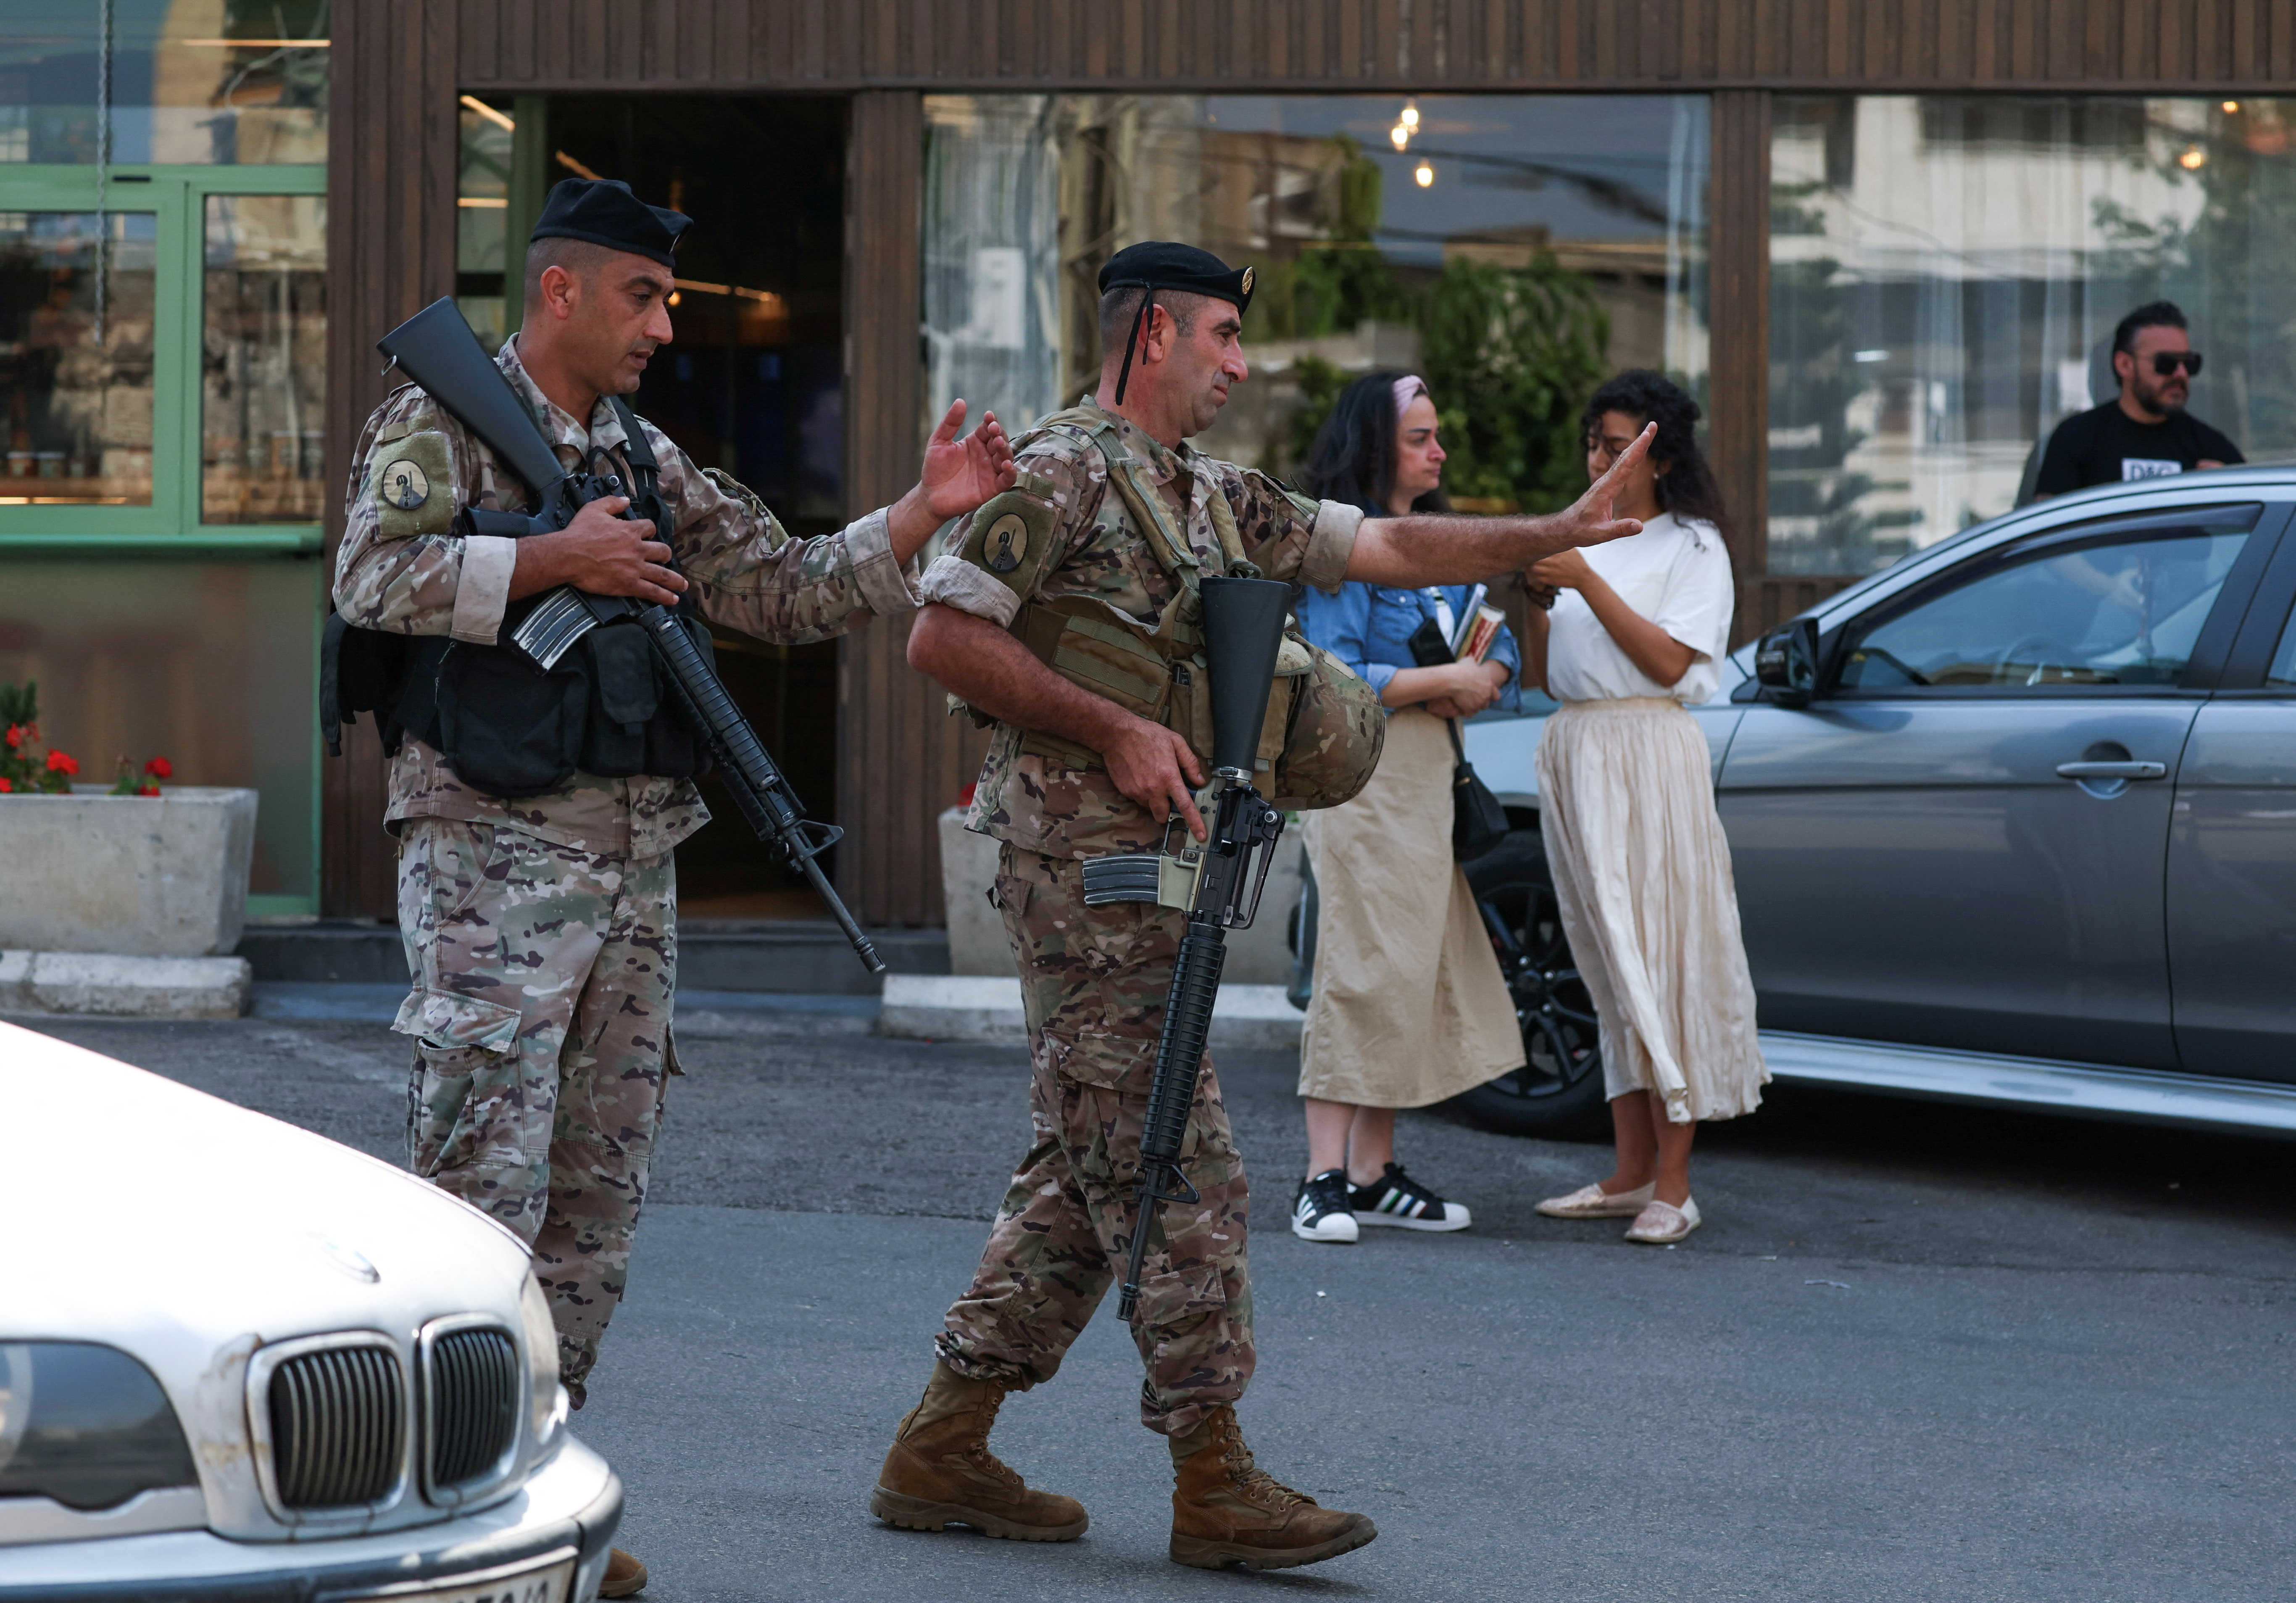 Lebanese army soldiers gesture as they secure the area near the U.S. embassy in Awkar